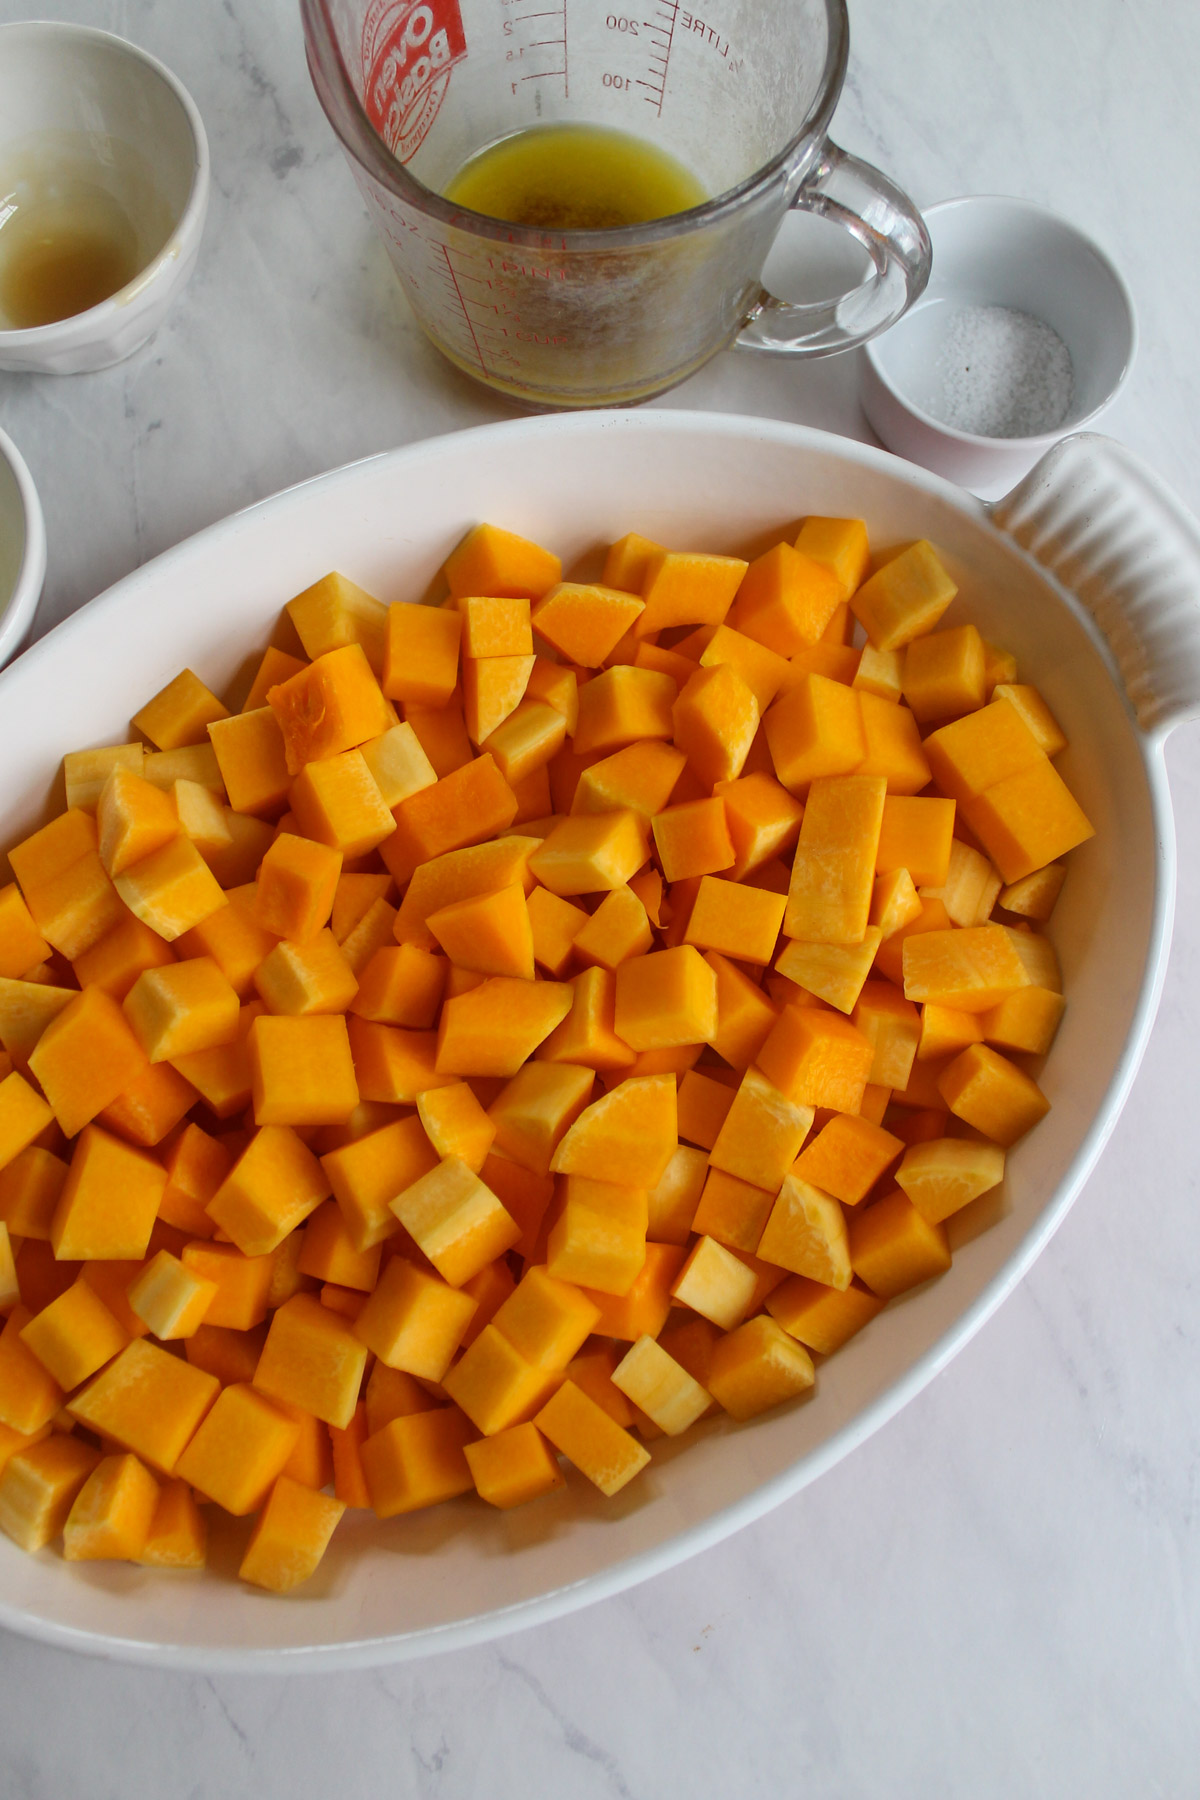 Butternut squash peeled and chopped and added to a white baking dish.